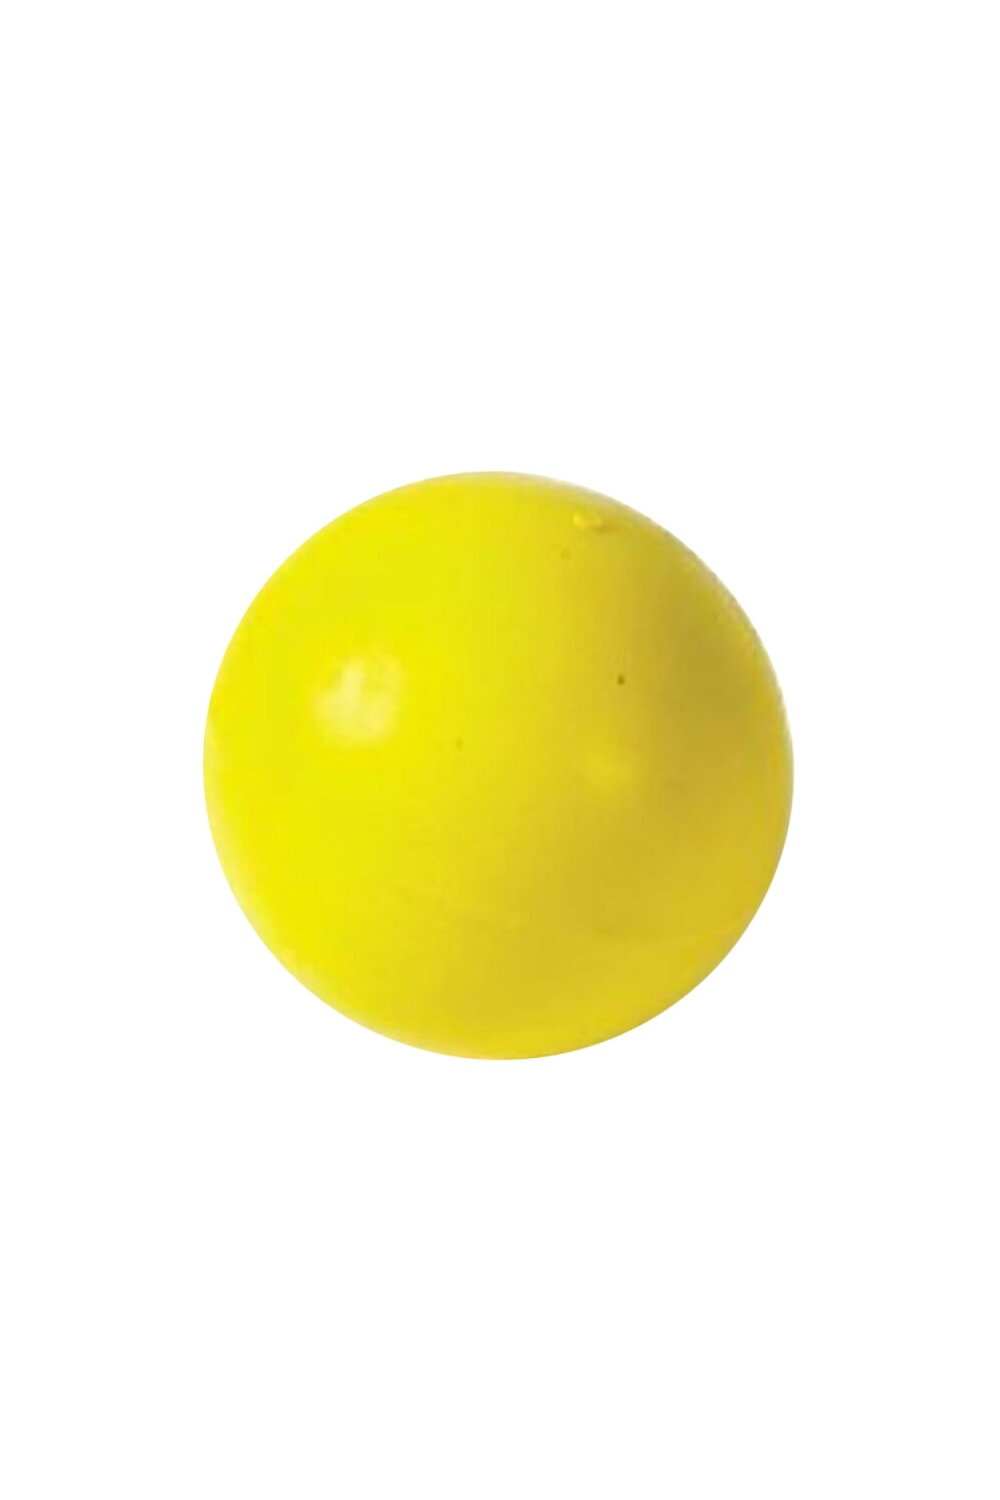 Classic Rubber Ball Dog Toy (May Vary) (Large)